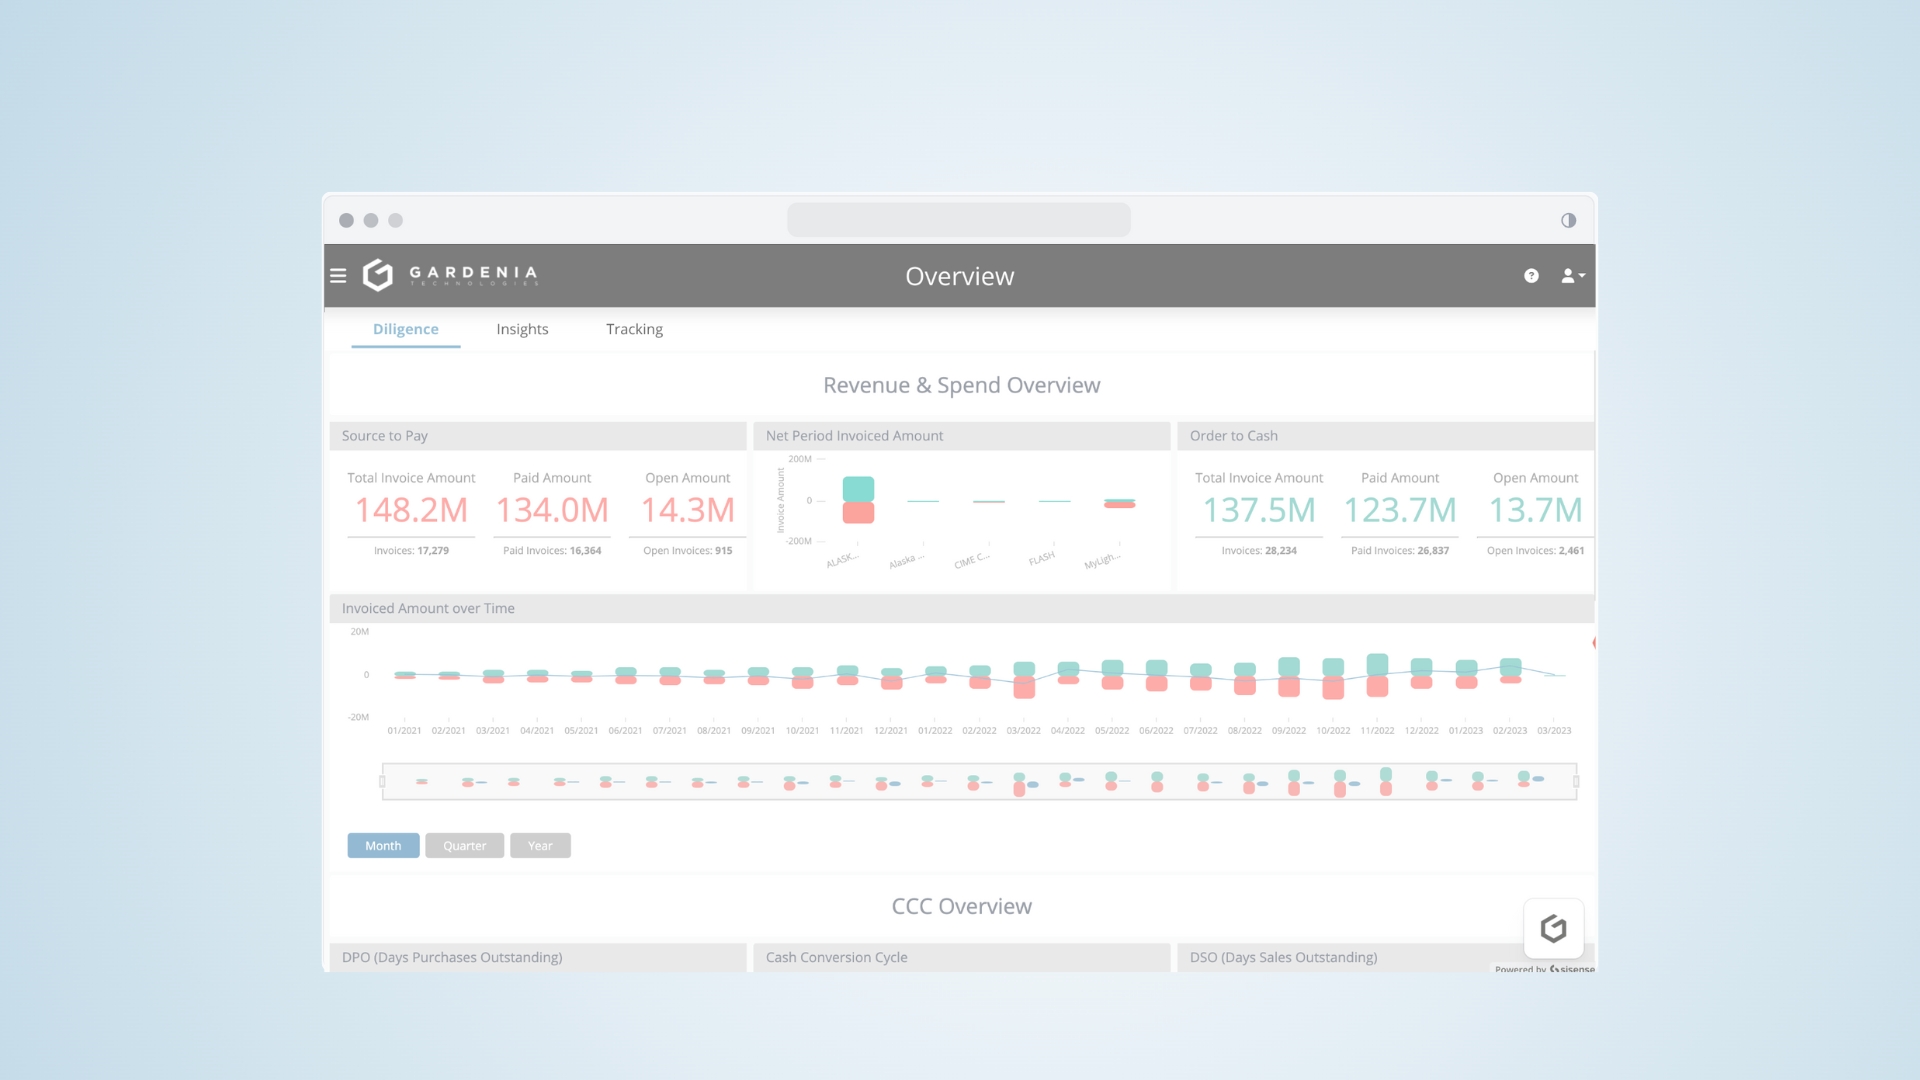 FP&A | See Your Working Capital KPIs in Real Time